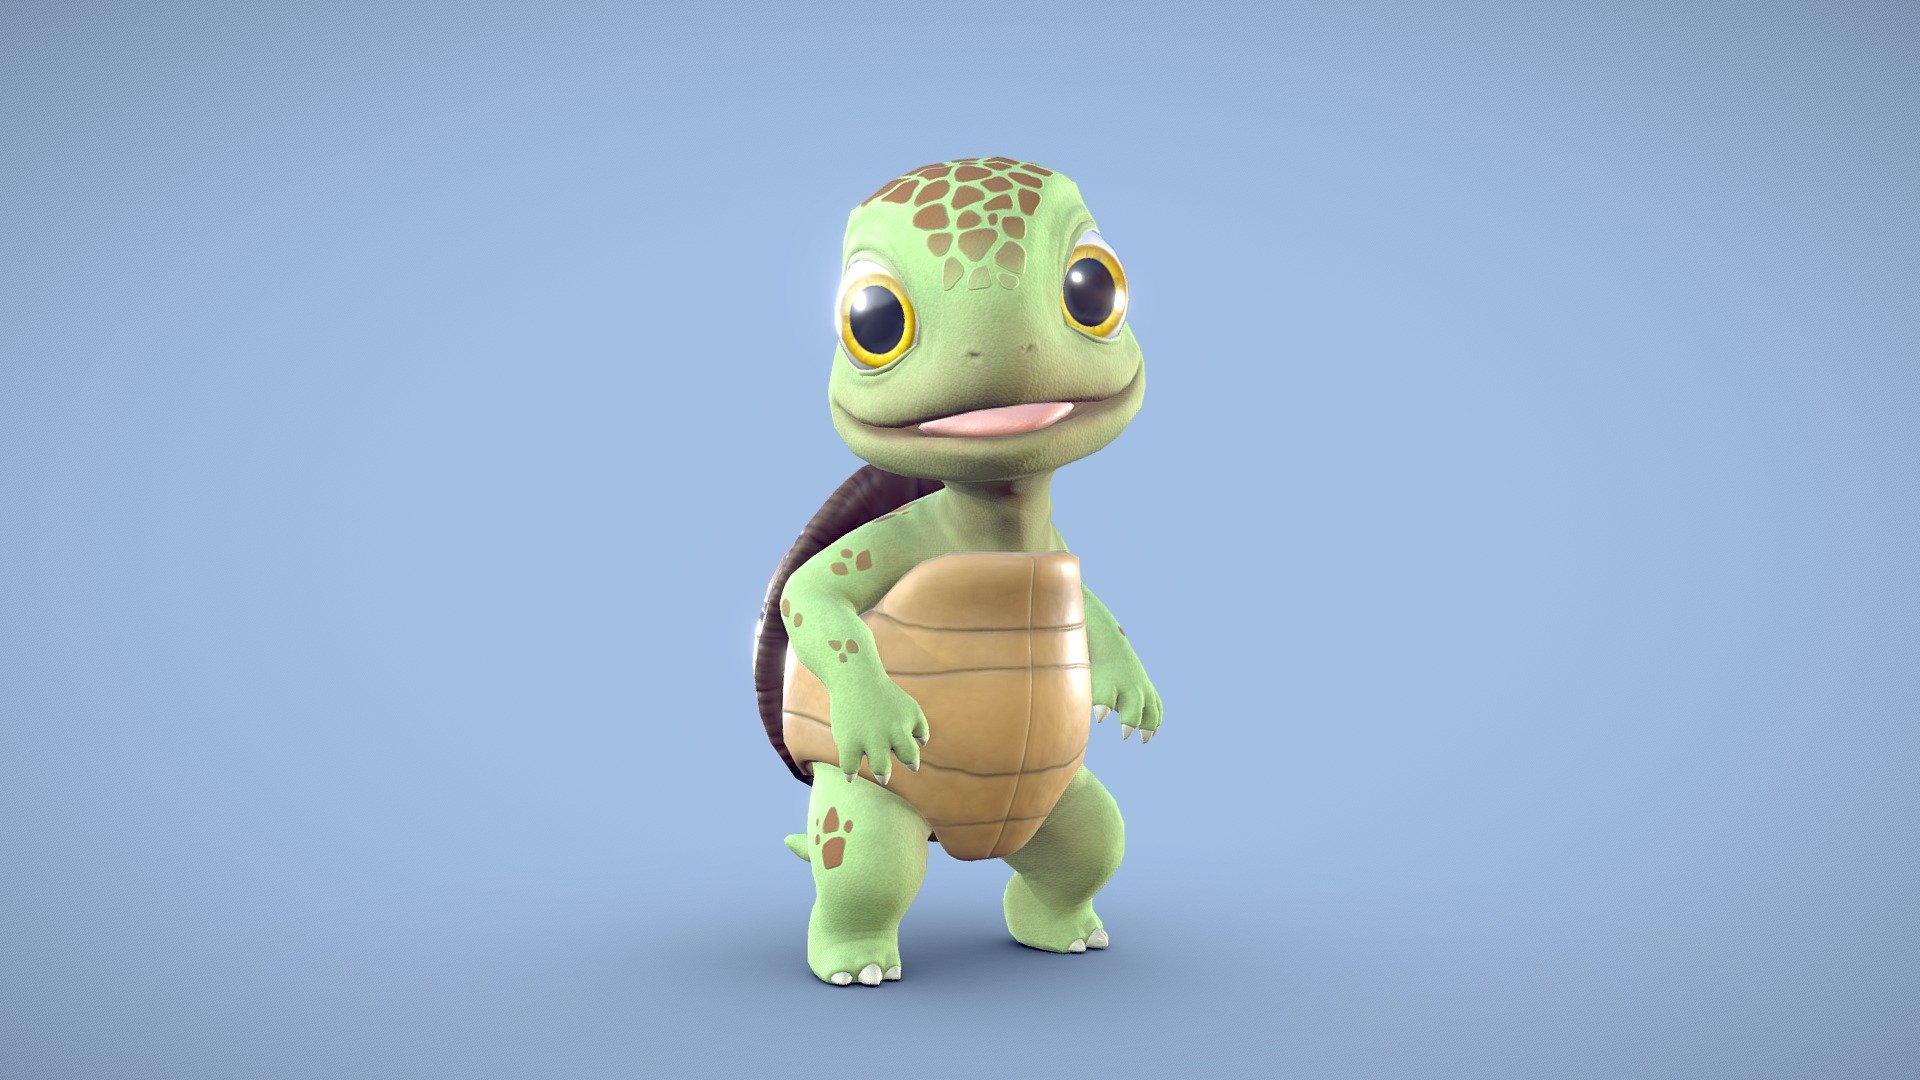 This little turtle loves playing with his own shell as a drum.
I was inspired by the artist Mickael Lelièvre who makes cute characters so awsome.

You can see the whole project here.
https://www.artstation.com/artwork/aYWxzX

Buy and get the sketchfab model, Pose A model and textures - Cute little turtle - Buy Royalty Free 3D model by efrenfreeze 3d model